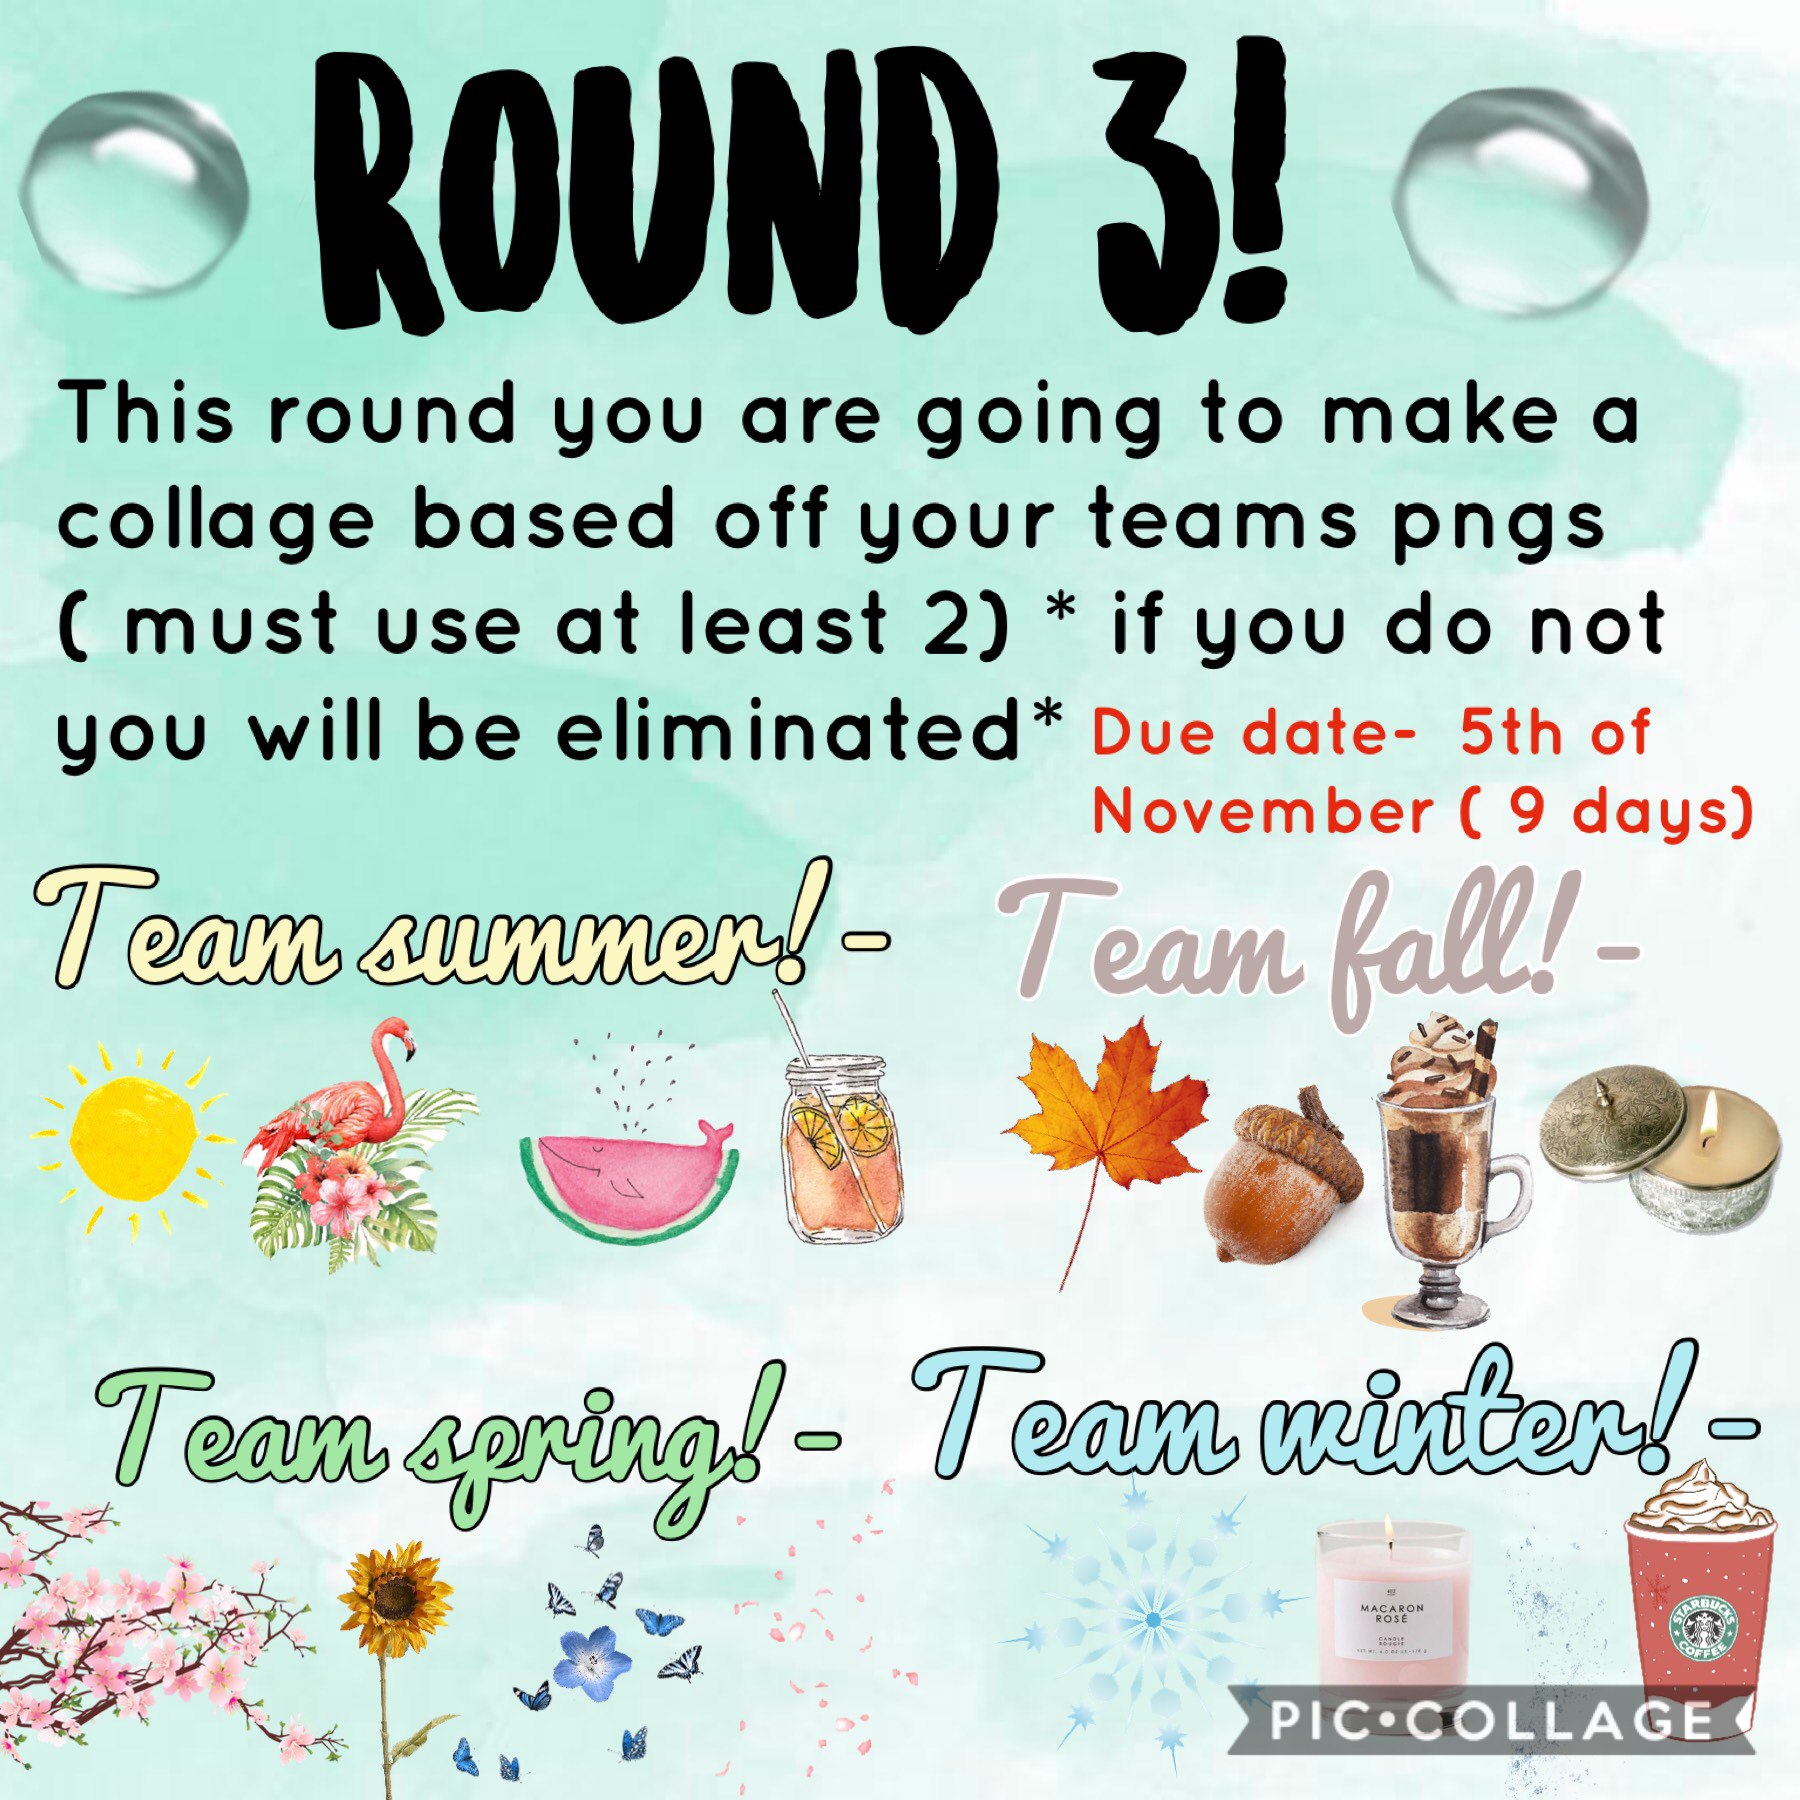 Good luck everyone! And remember you can make any type of collage you want as long as it includes your season and at least two pngs. Have fun everyone!!💕